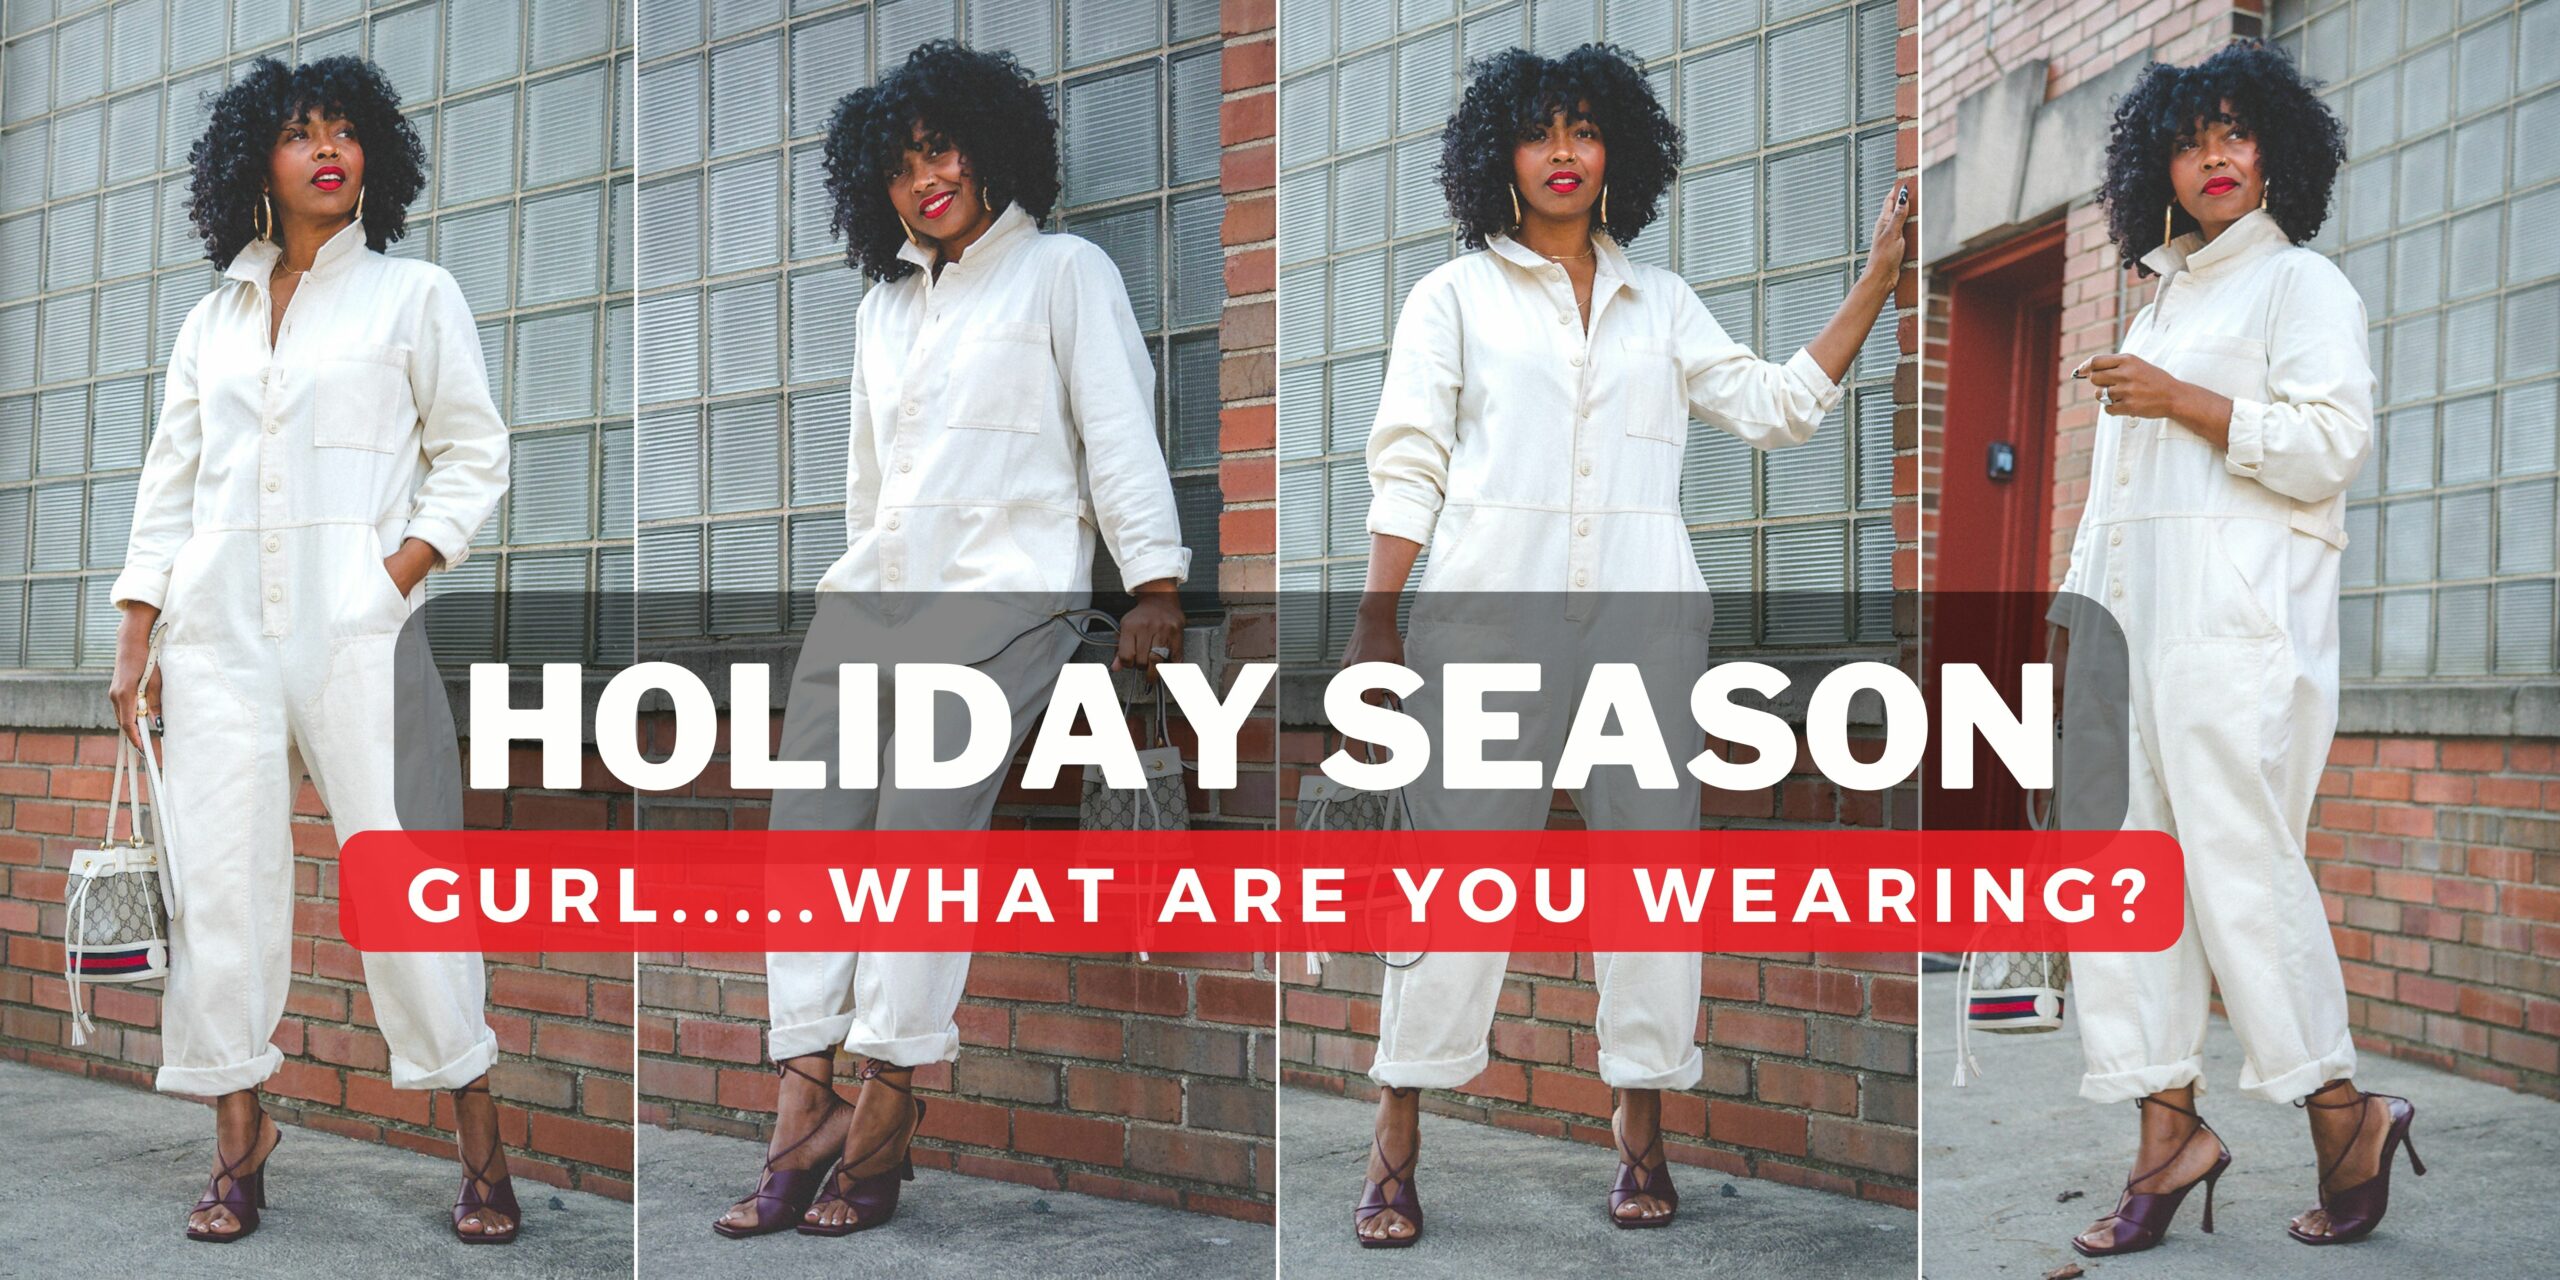 How To Run Errands In Style This Holiday Season - Economy of Style